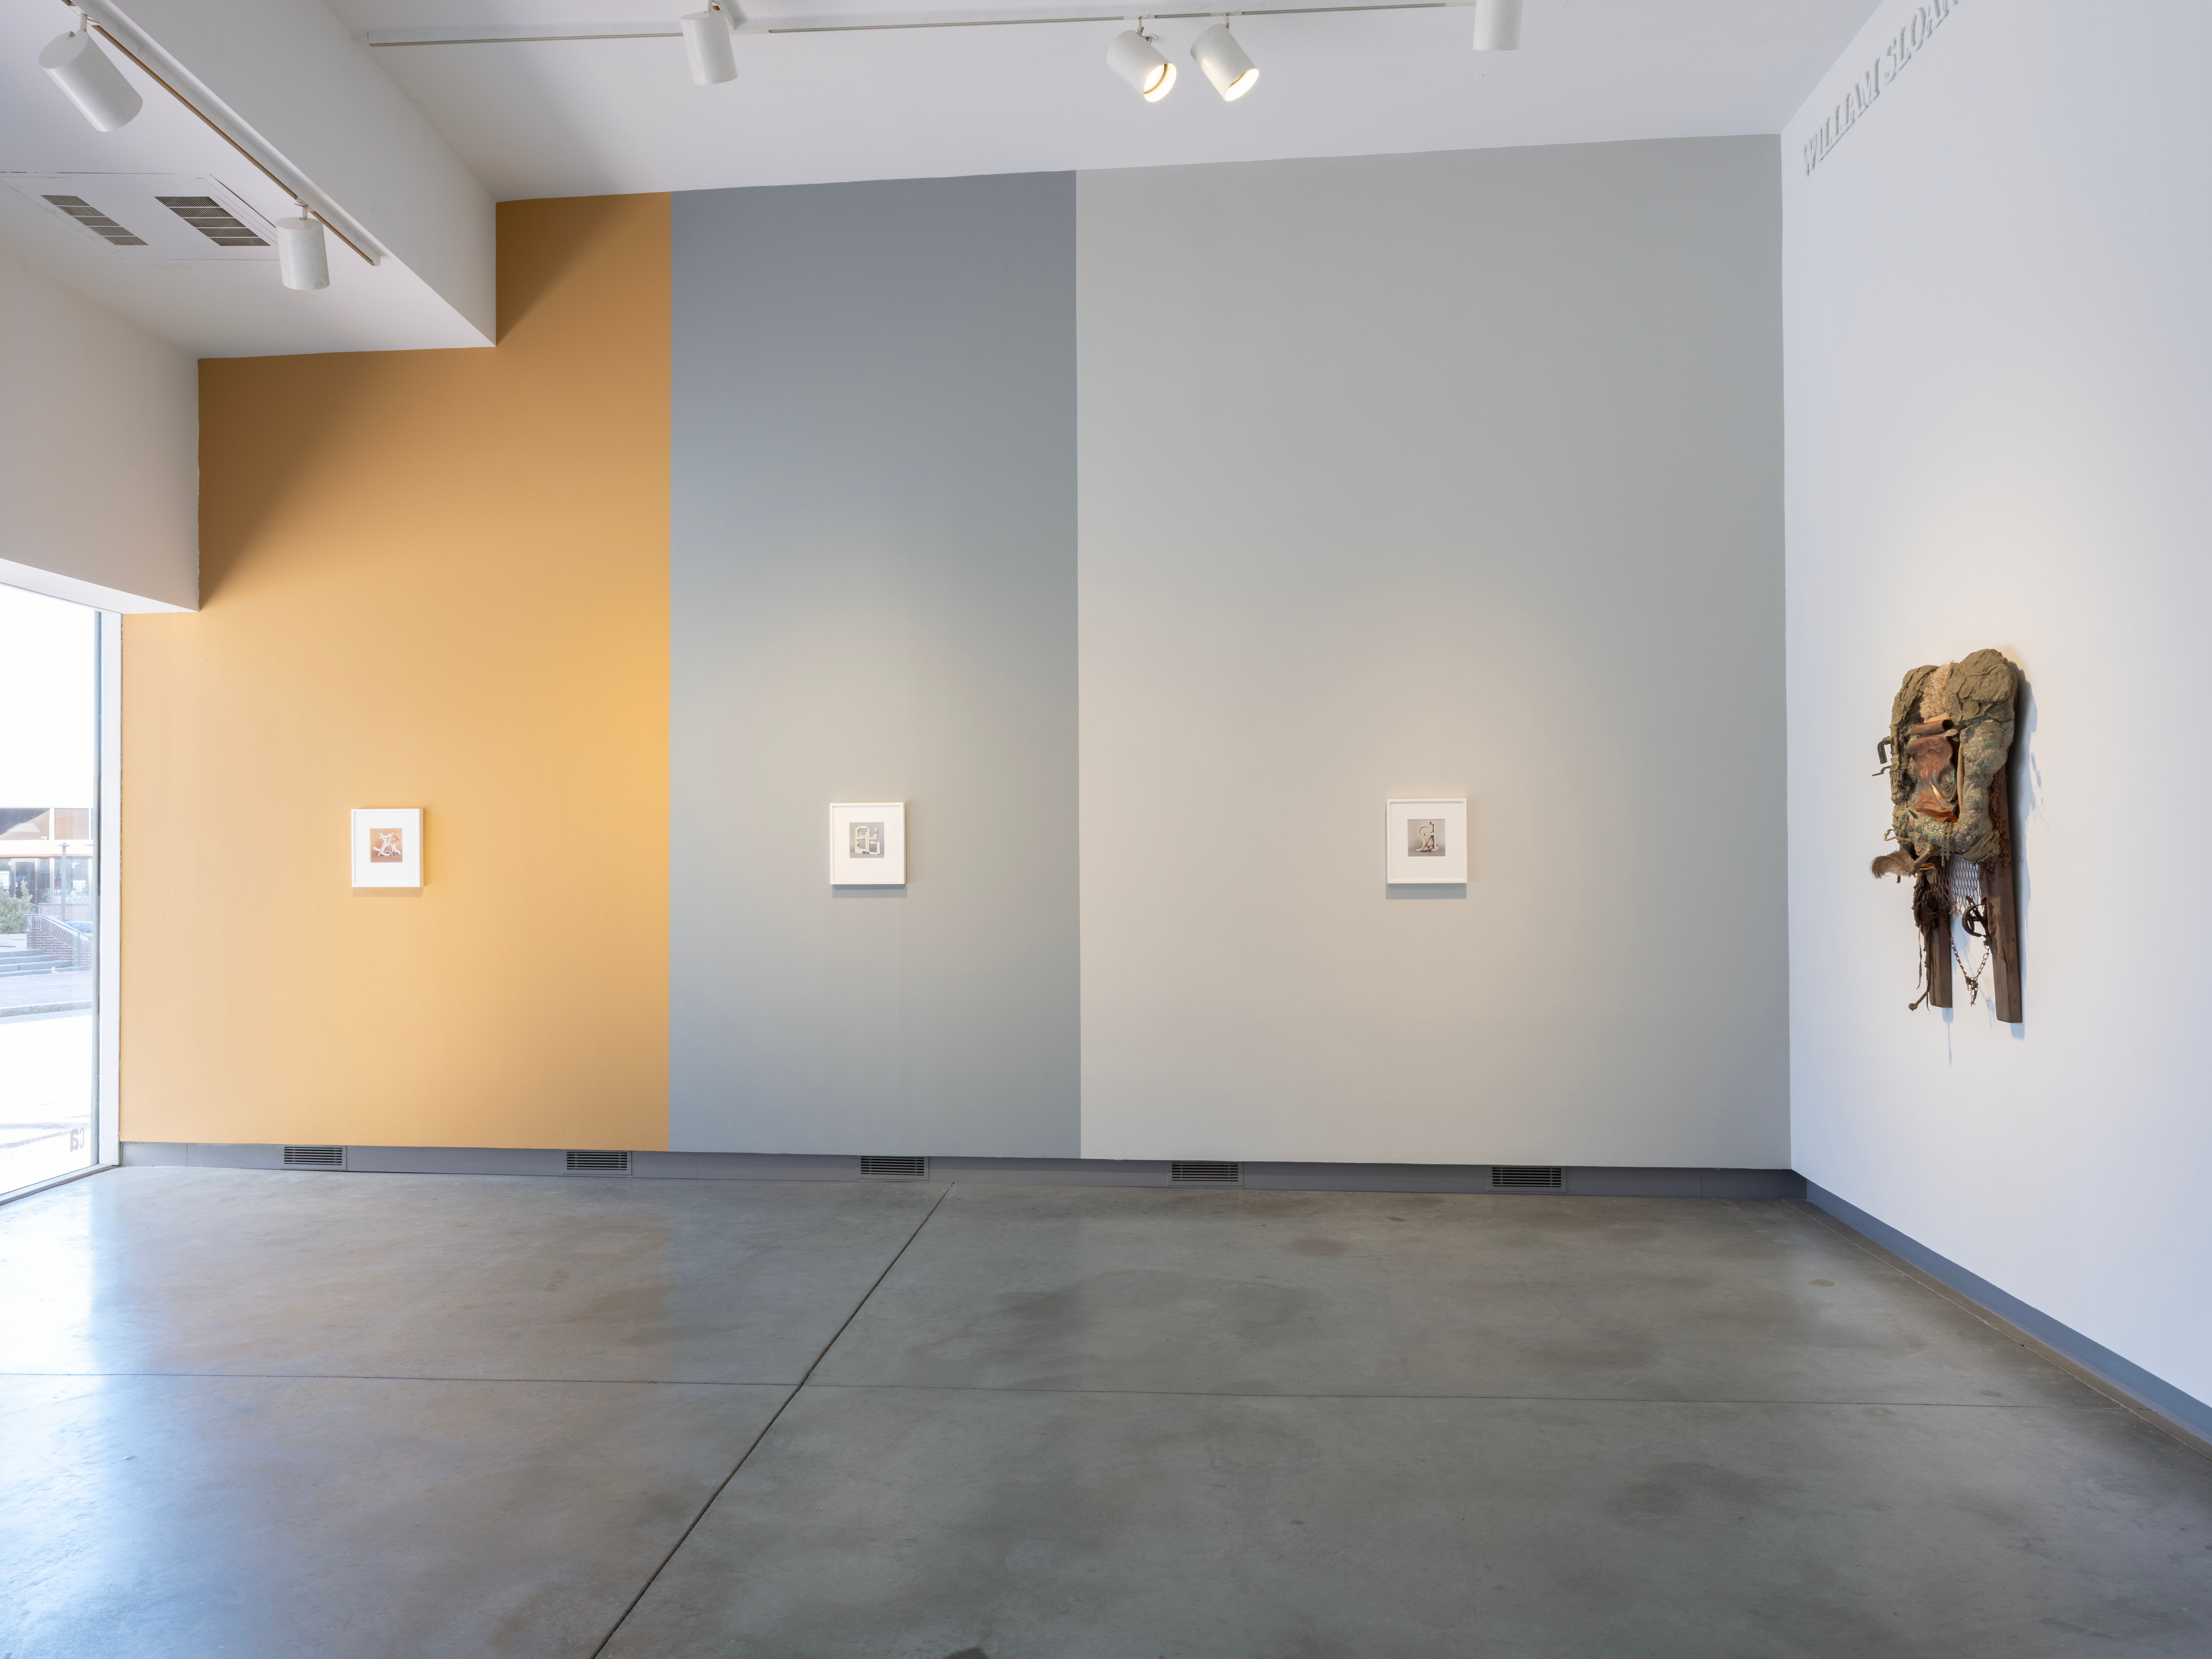 ENTER: installation view of three framed photographs against a wall painted yellow, dark grey, and light grey, and a sculpture hanging from the wall.